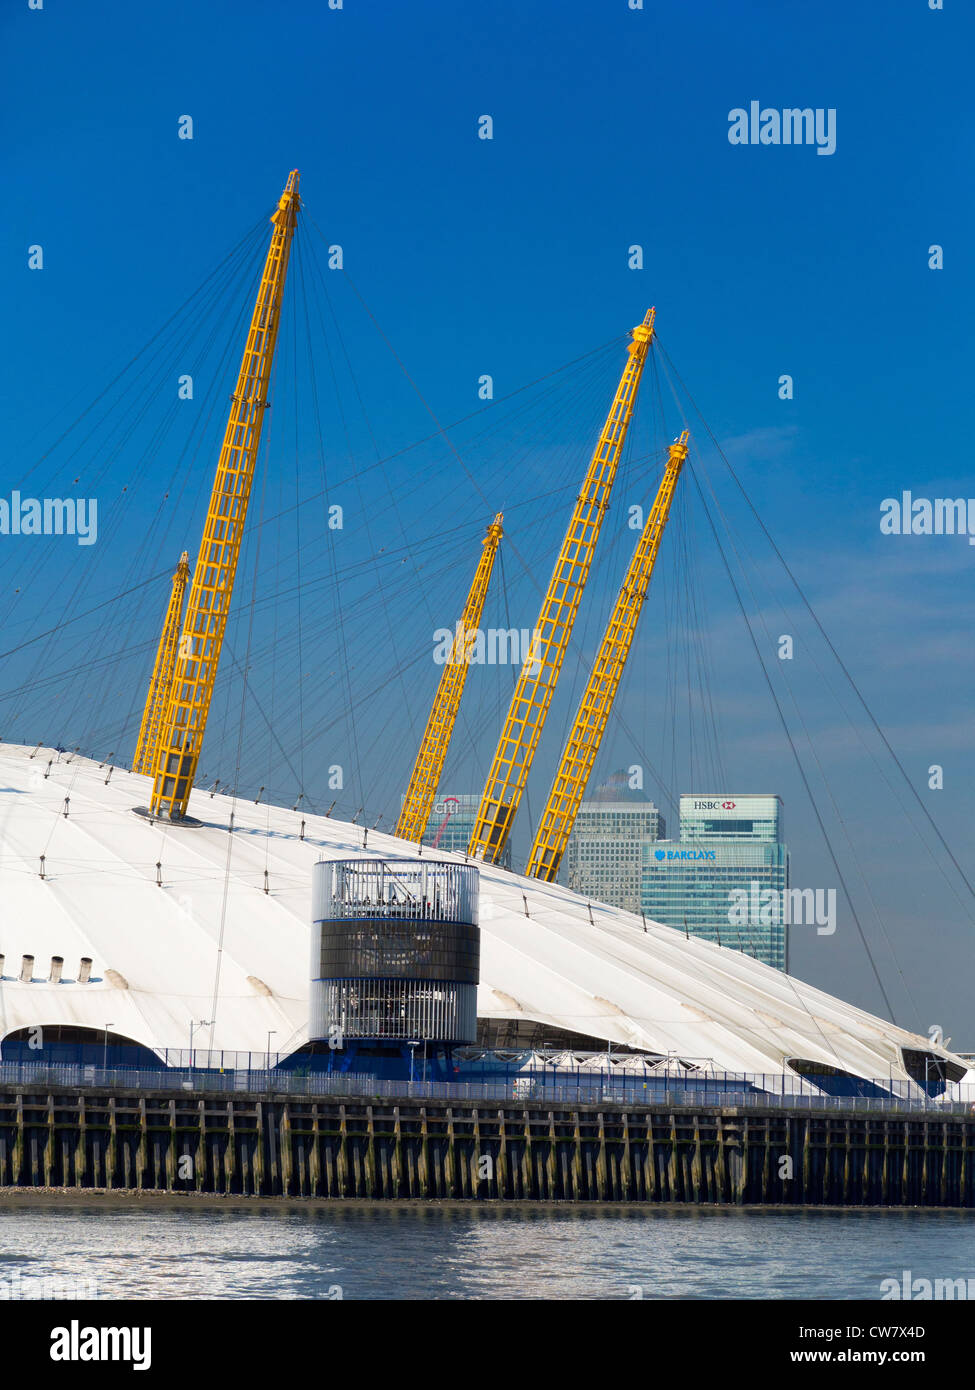 The Greenwich O2 Dome, London, Canary Wharf in background Stock Photo